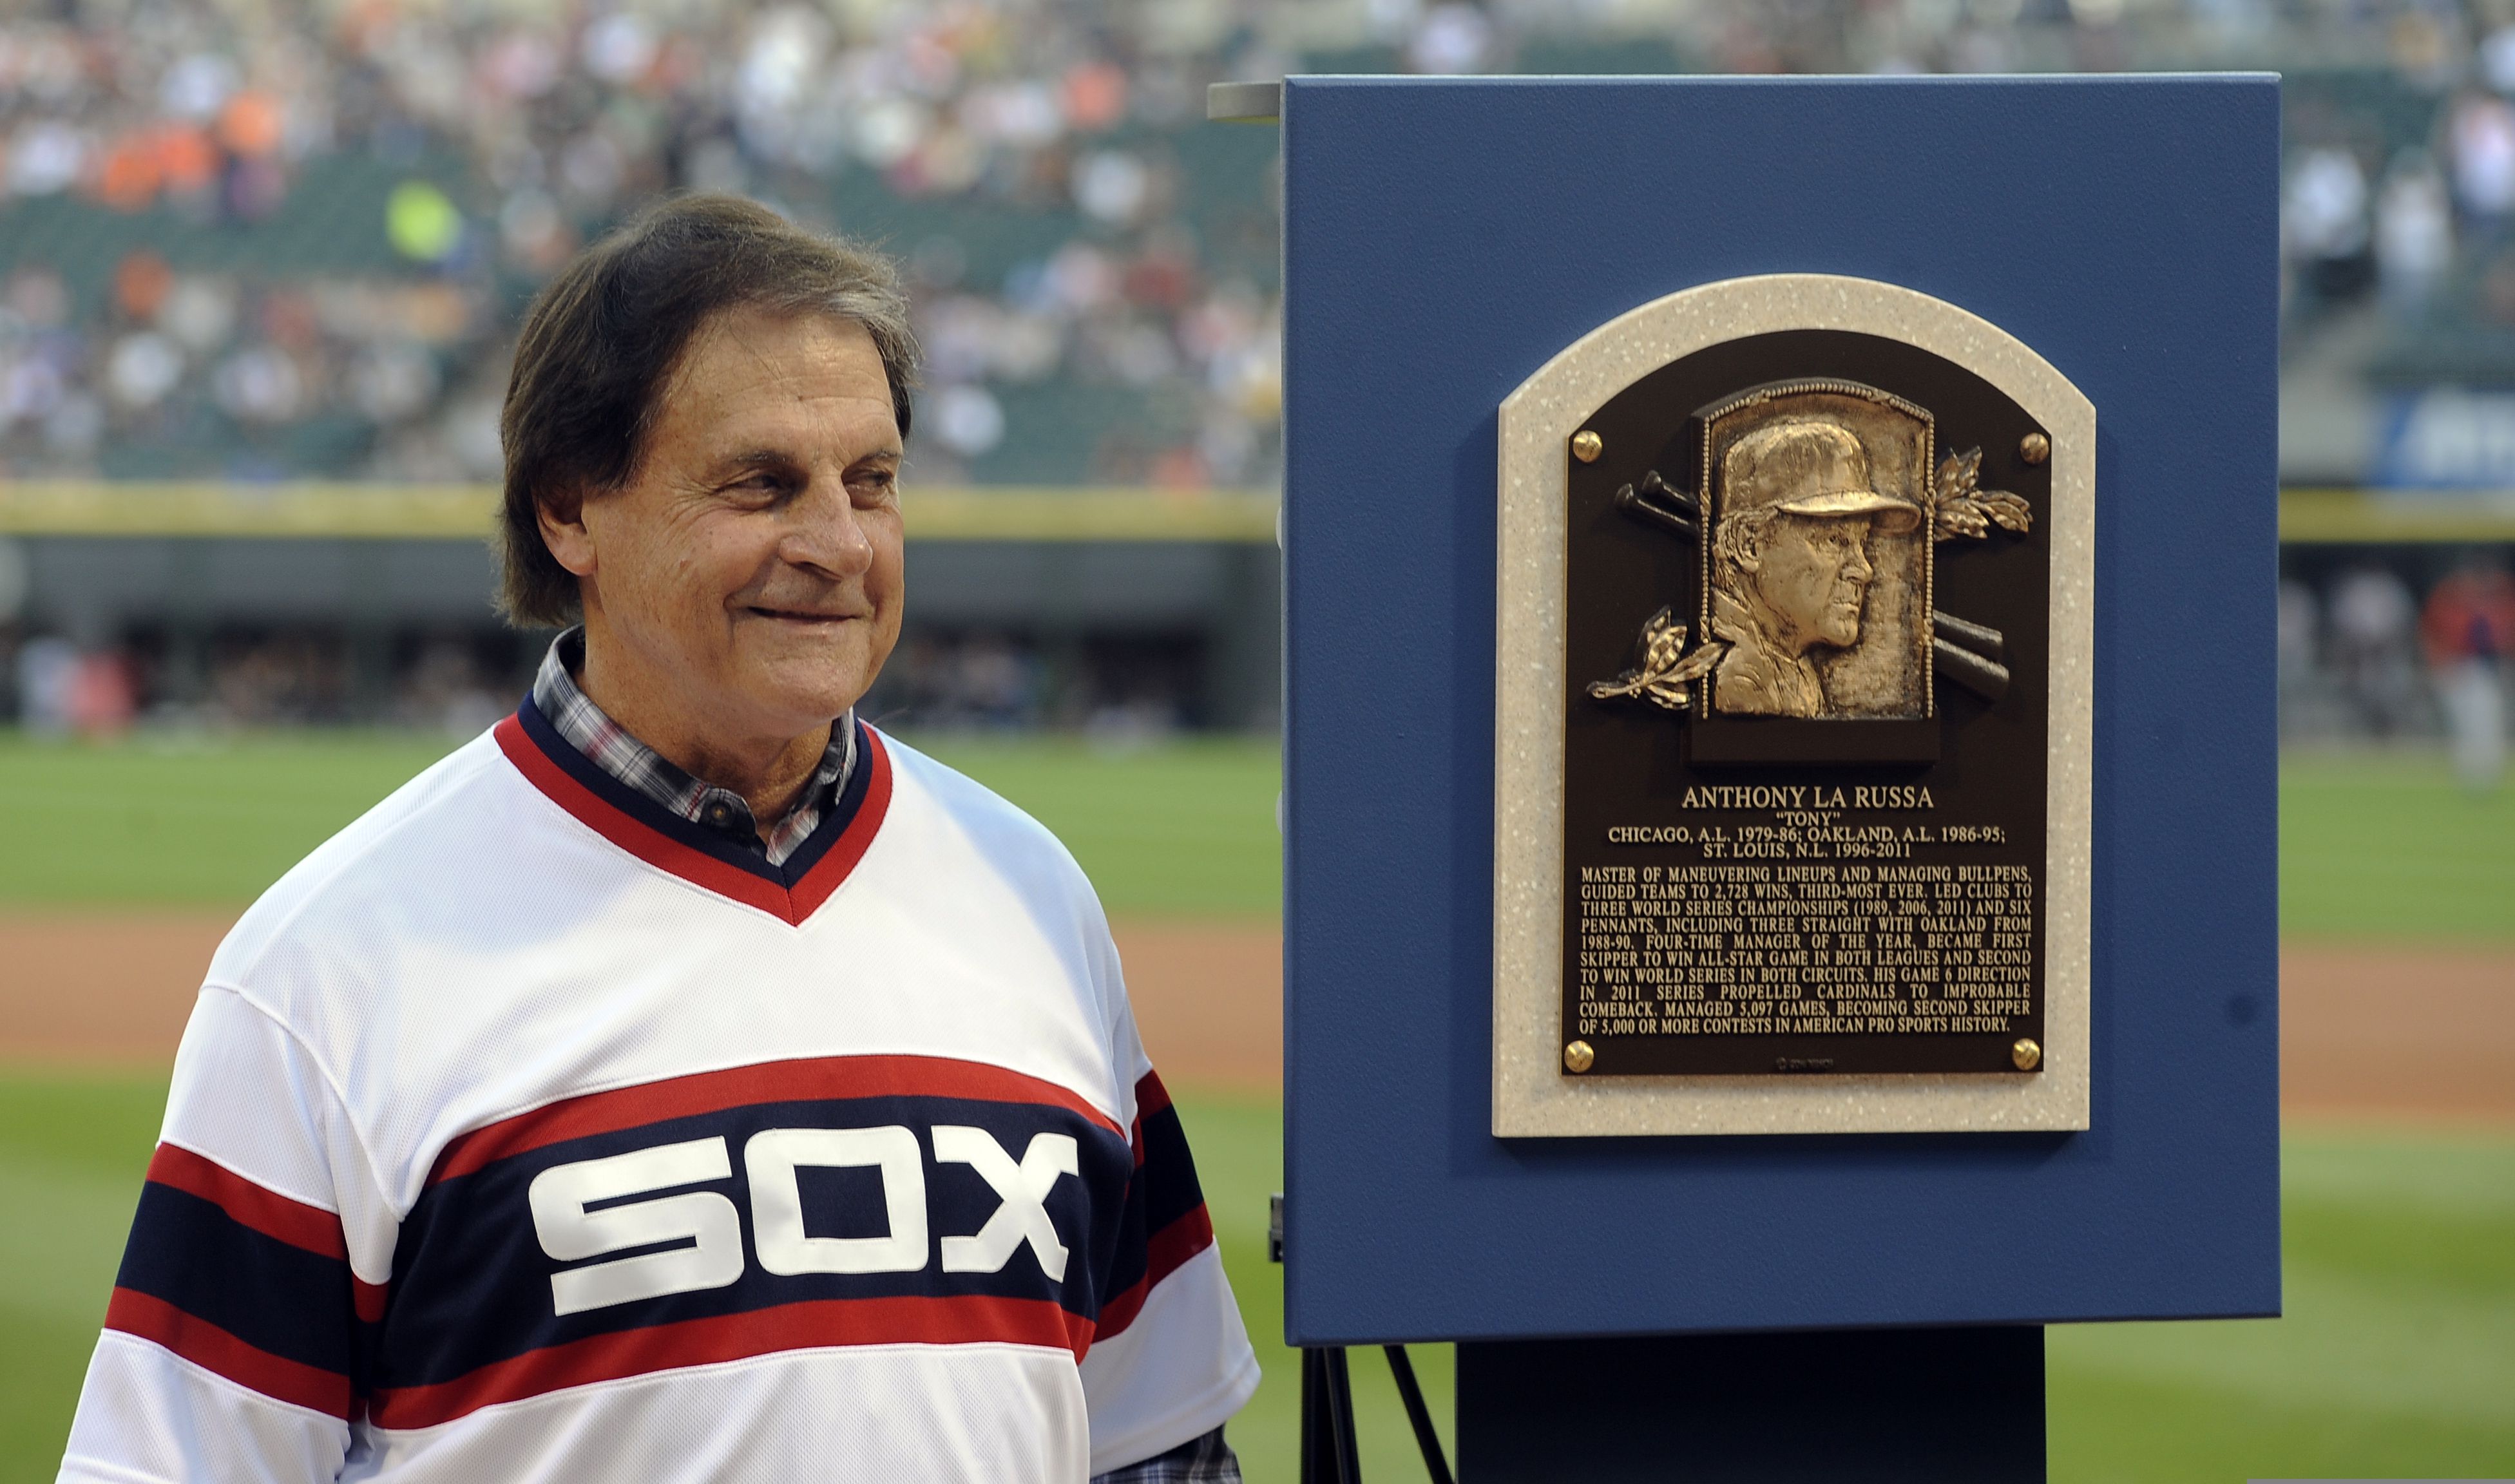 Hall of Fame manager Tony La Russa announces retirement after